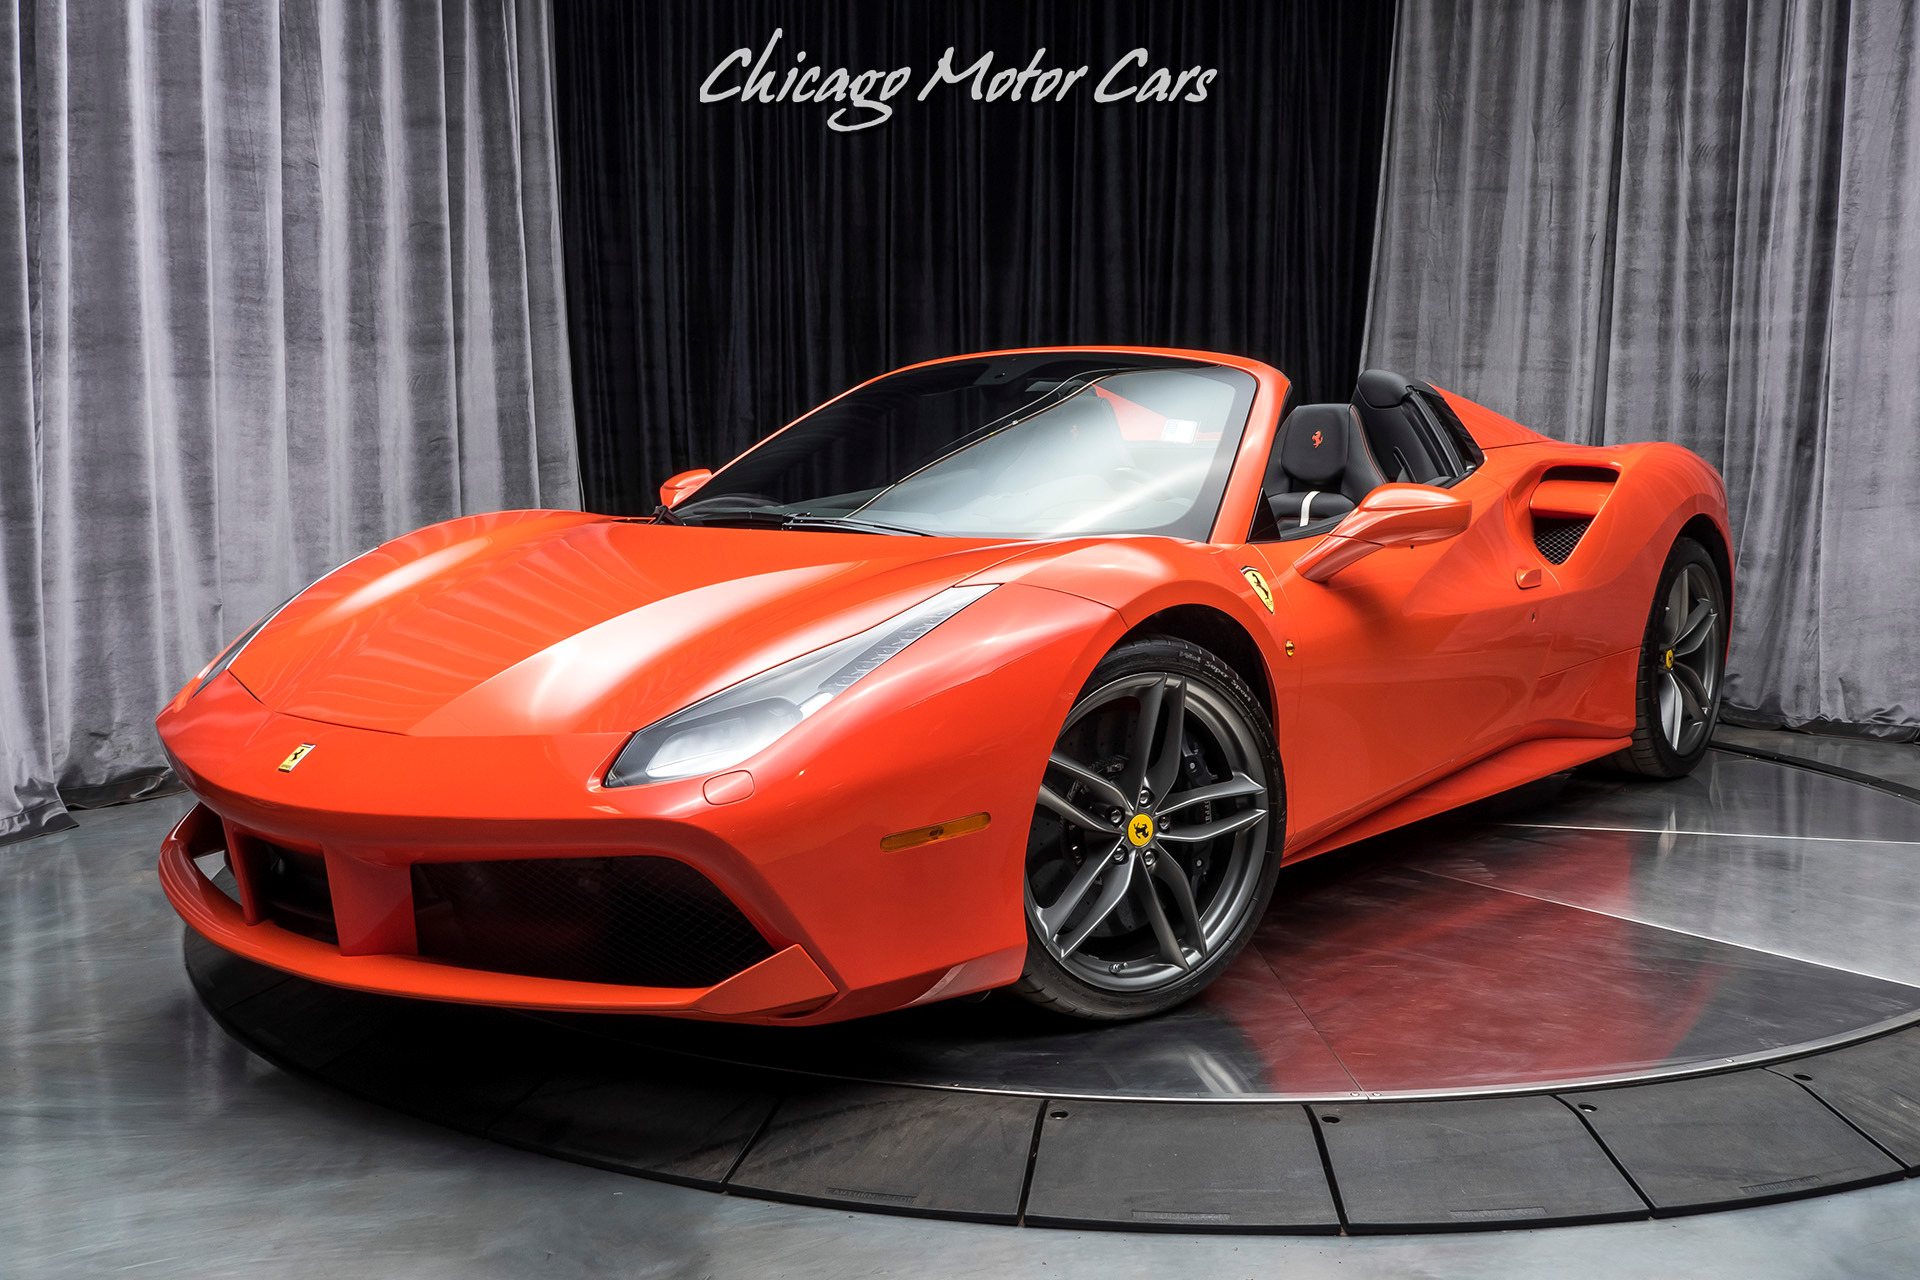 Used-2019-Ferrari-488-Spider-Convertible-353k-MSRP-Only-250-Miles-Rosso-Dino